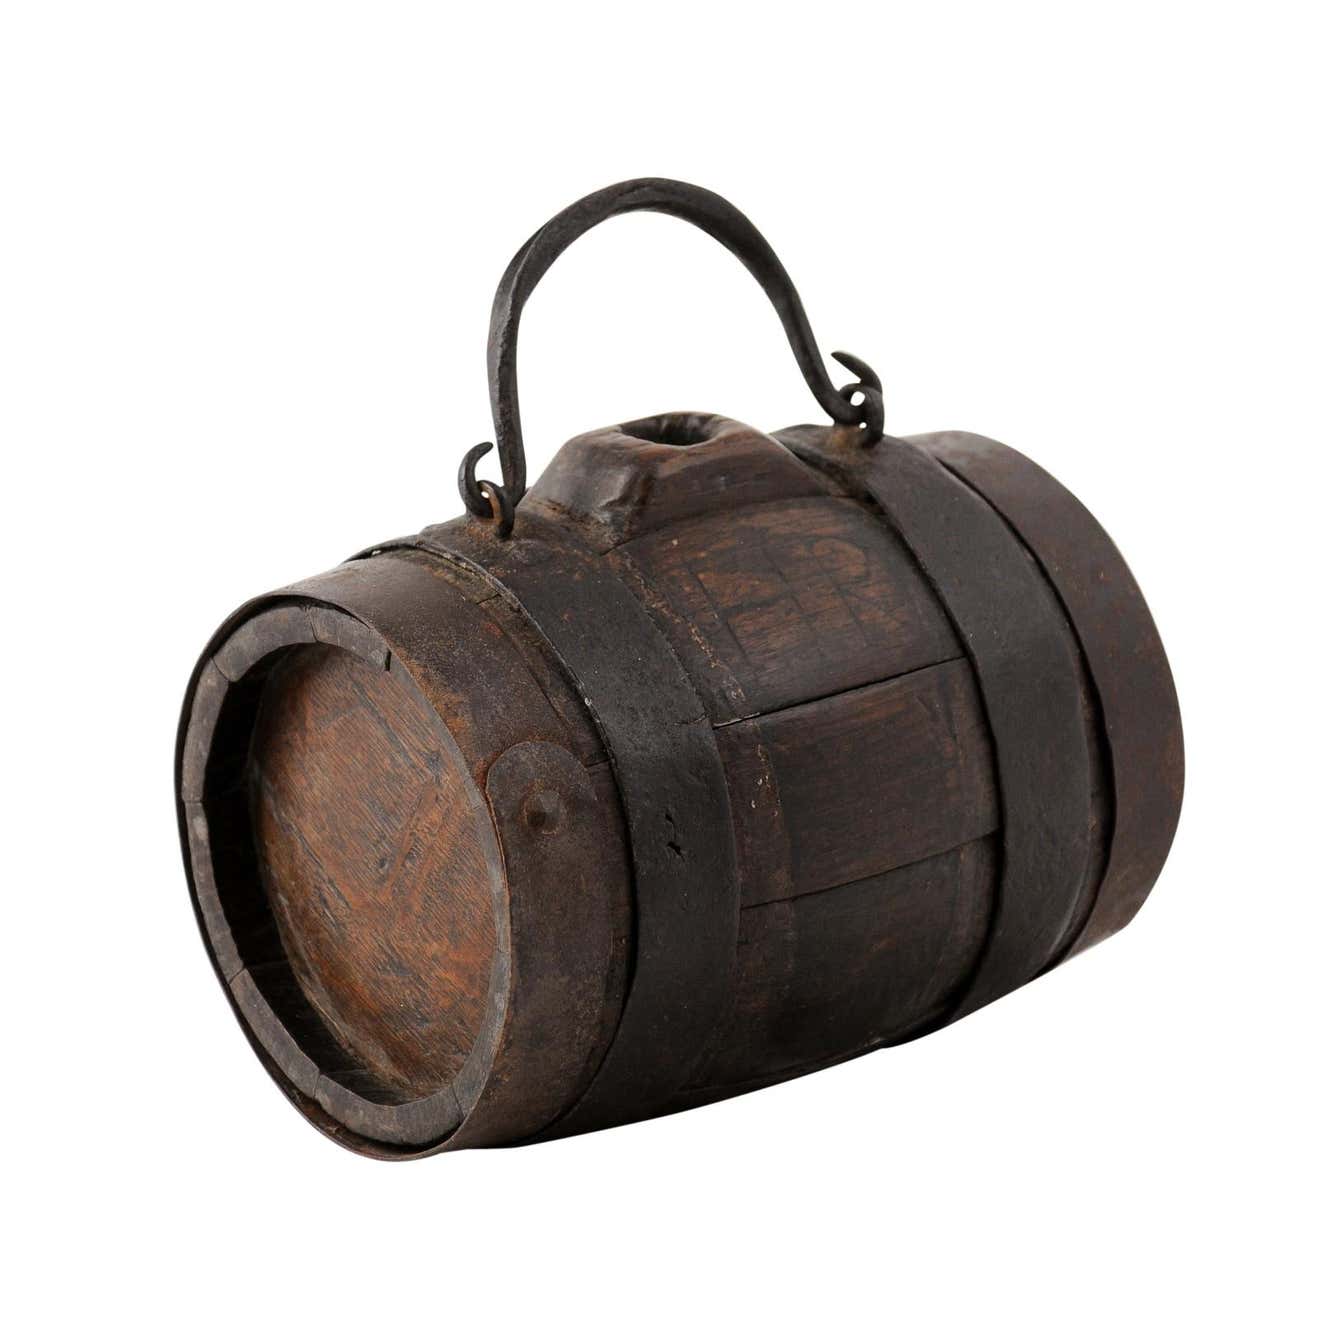 Rustic French 19th Century Petite Decorative Barrel with Iron Handle and Braces